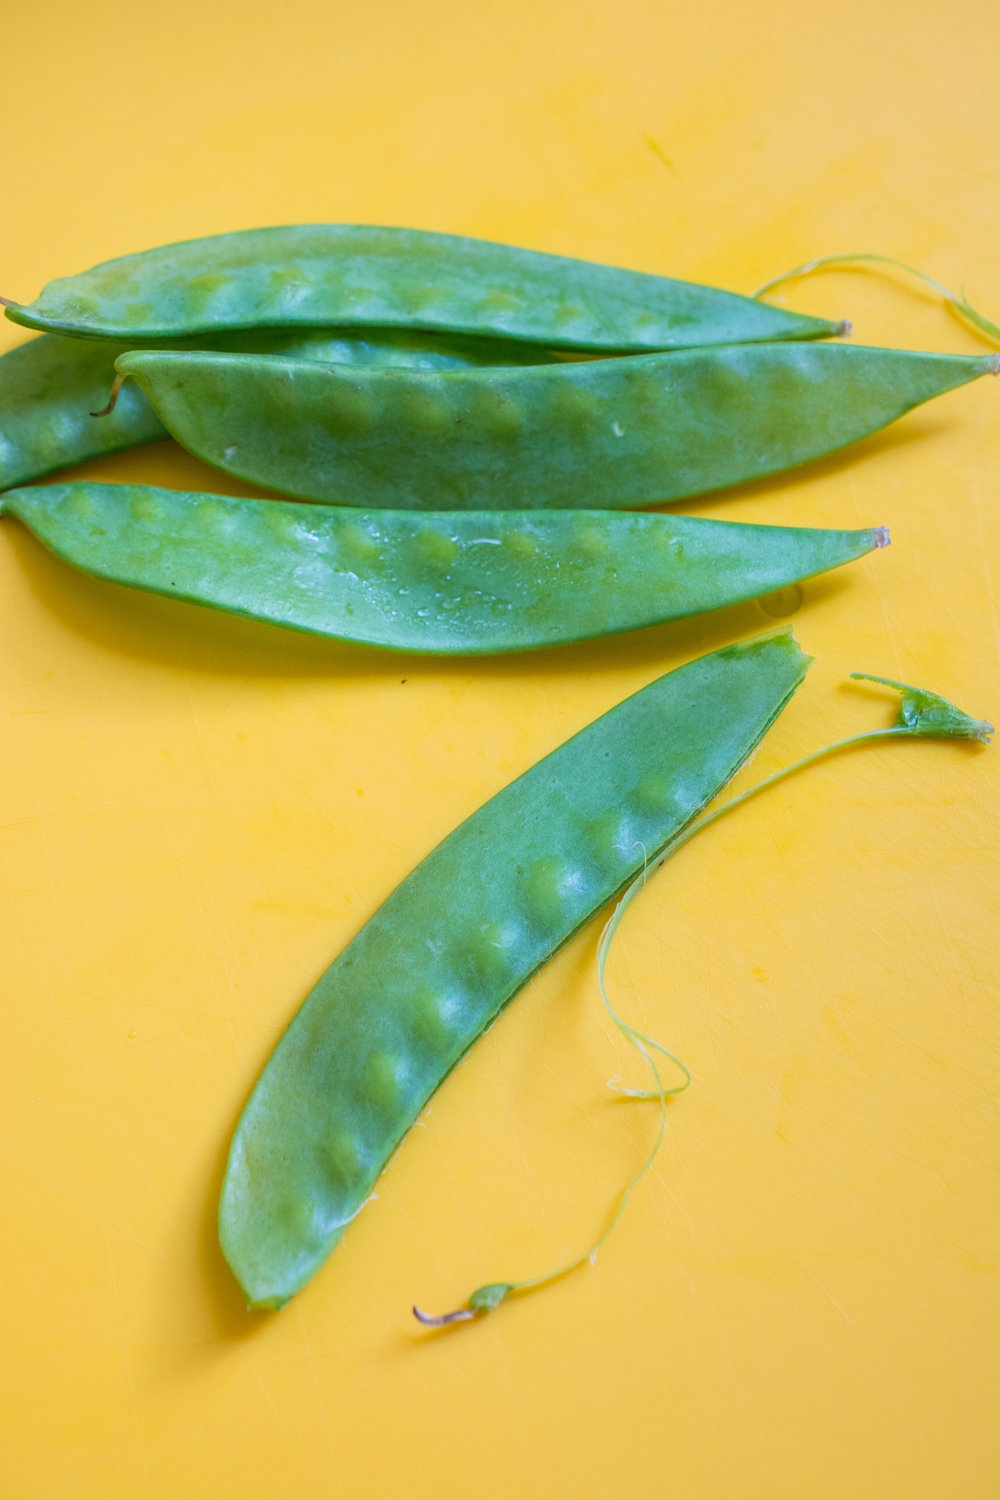 Snow Peas without string